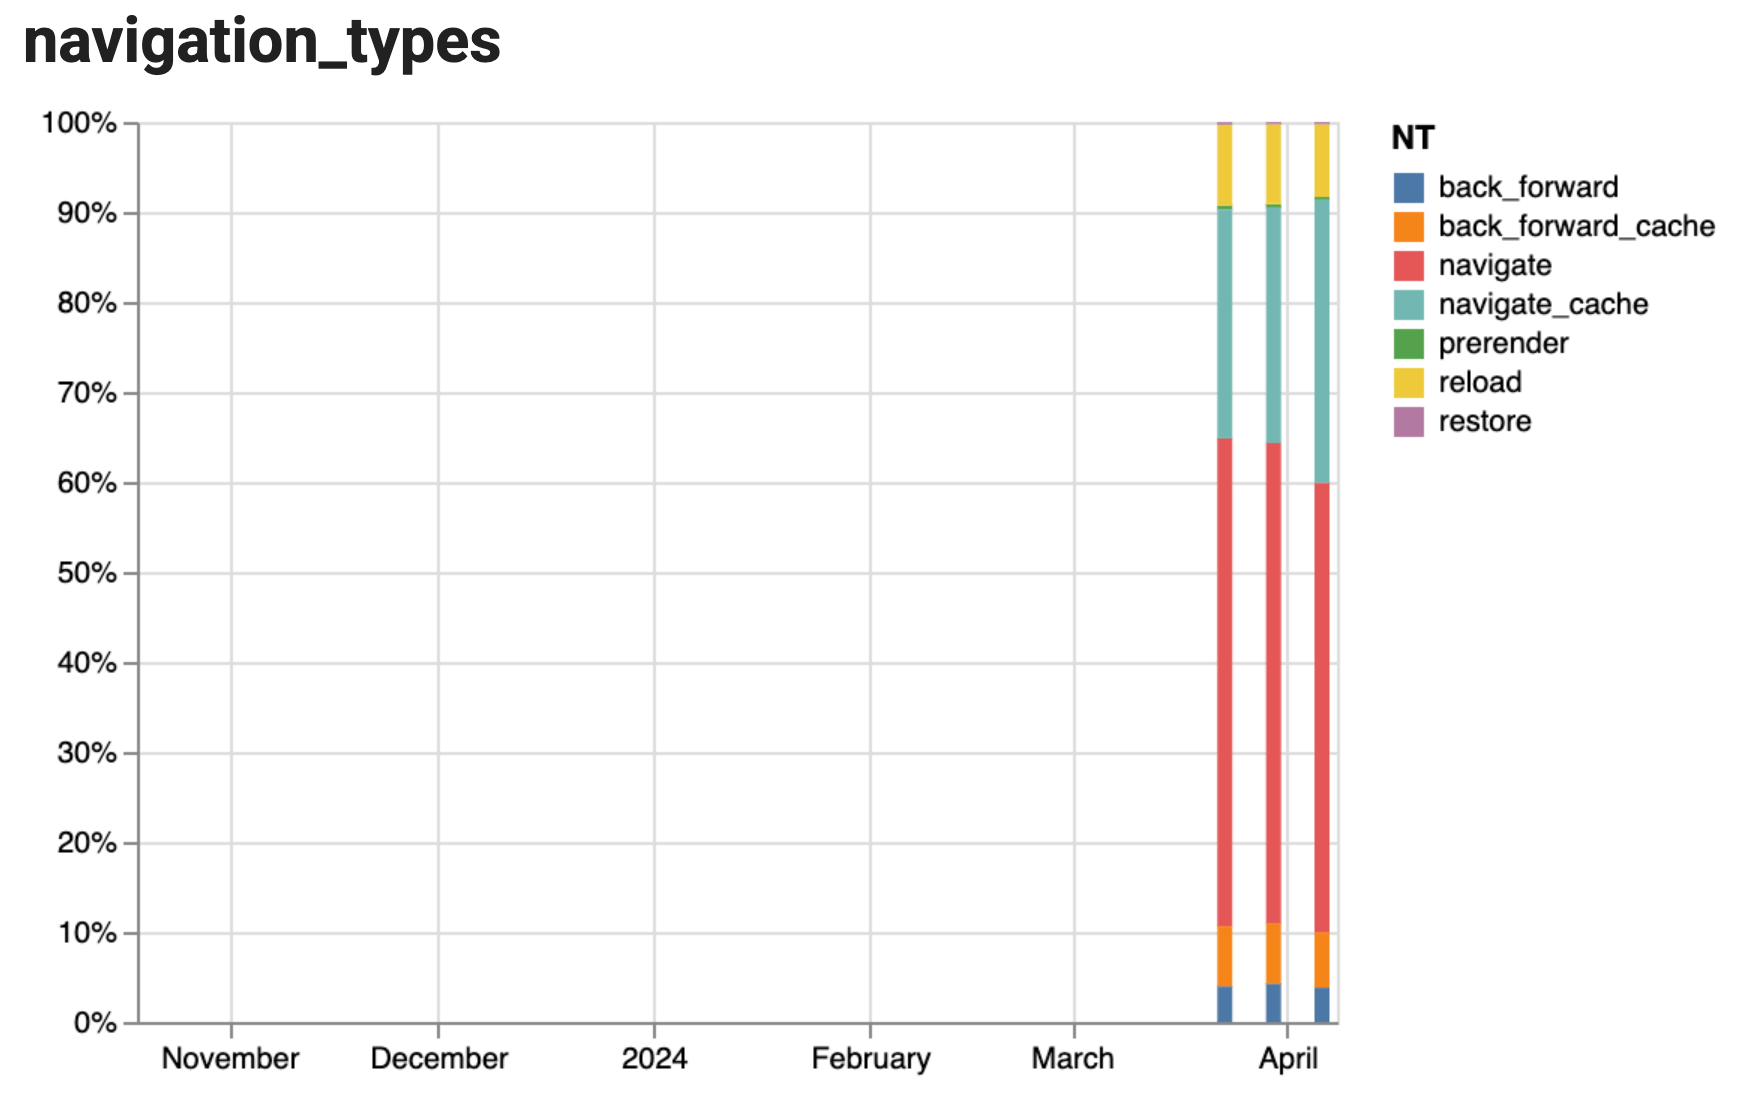 Stacked barchart showing the history of navigation types over 3 weeks, with the majority of navigation being 'navigate' type and no major changes over the three weeks.